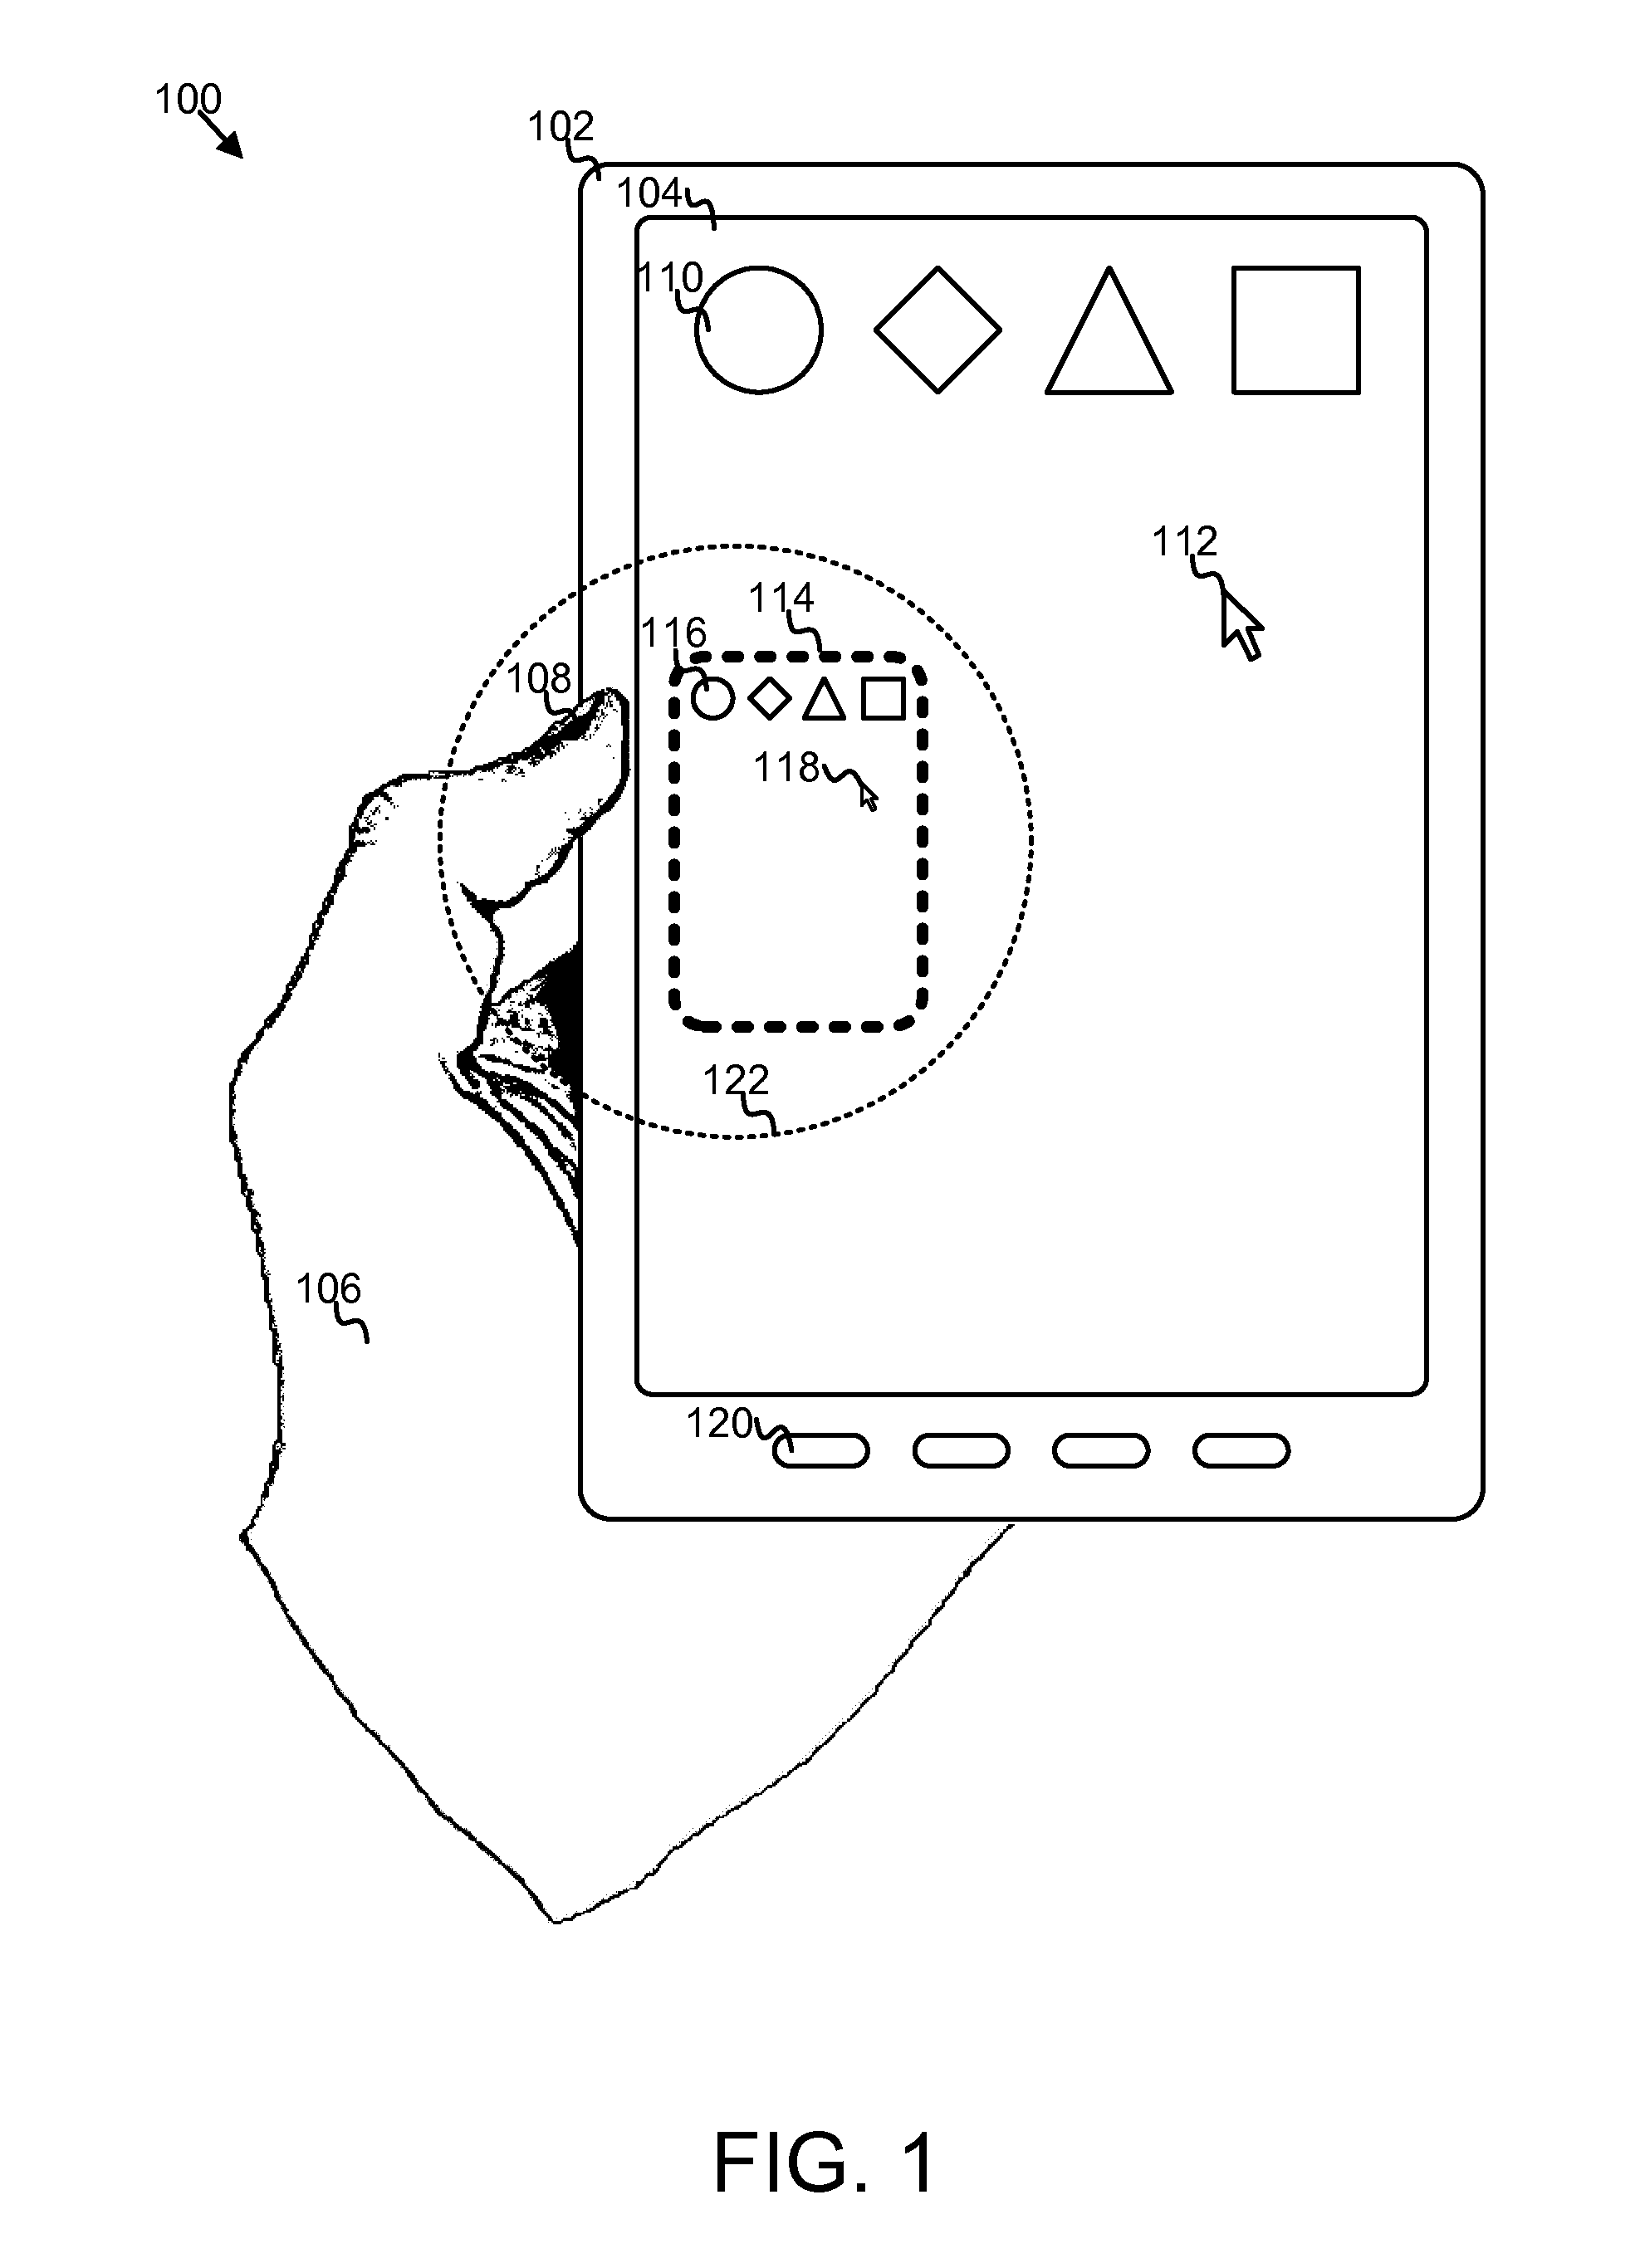 Virtual touchpad for a touch device